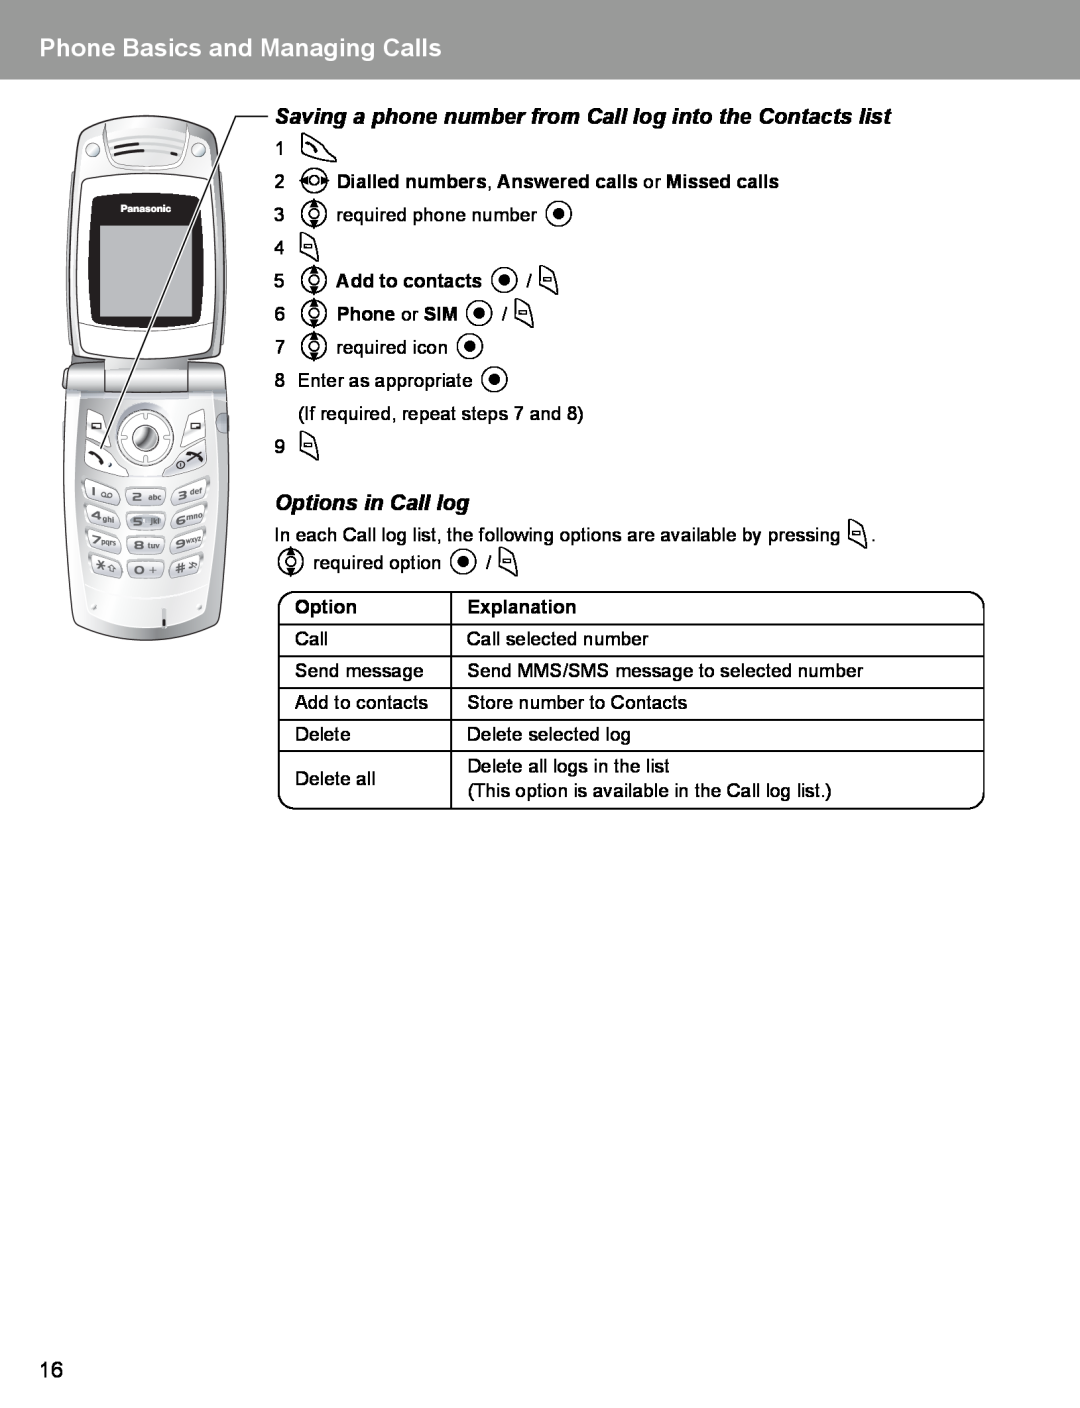 Panasonic EB-X400 Saving a phone number from Call log into the Contacts list, Options in Call log, Explanation 